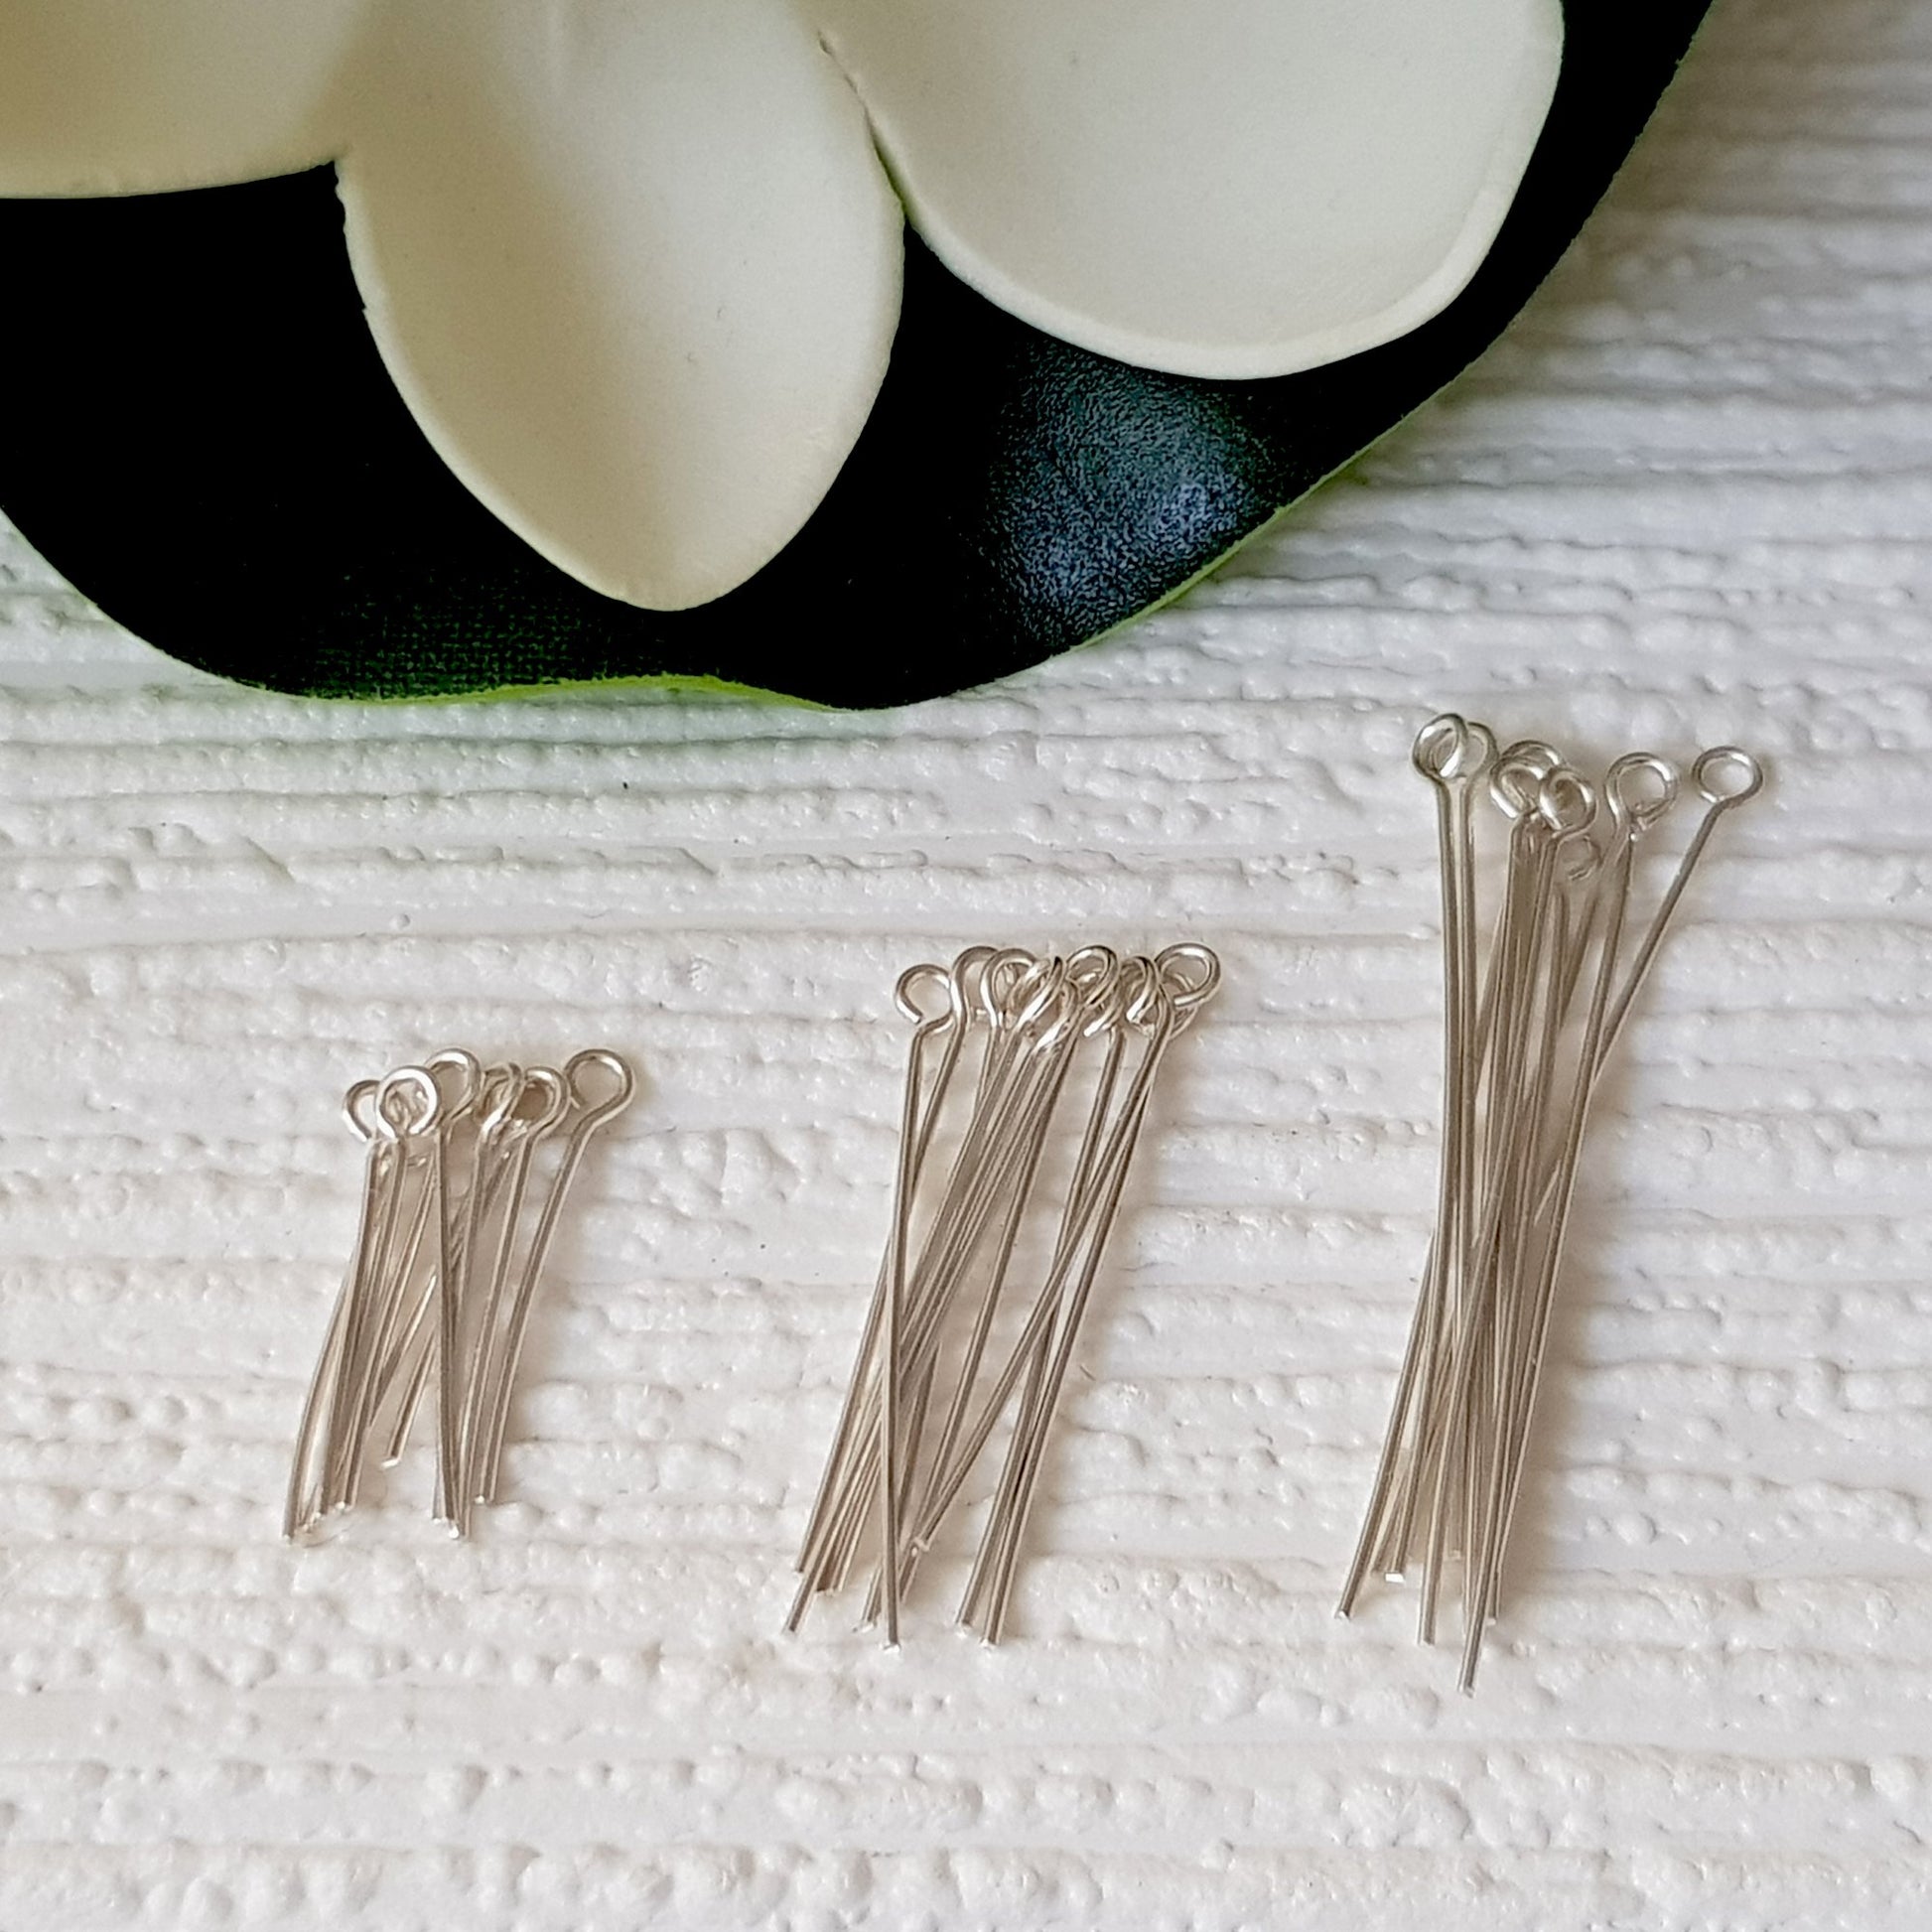 100 or 500 Pieces: 18 mm Silver Plated Eye Pins, 21 gauge